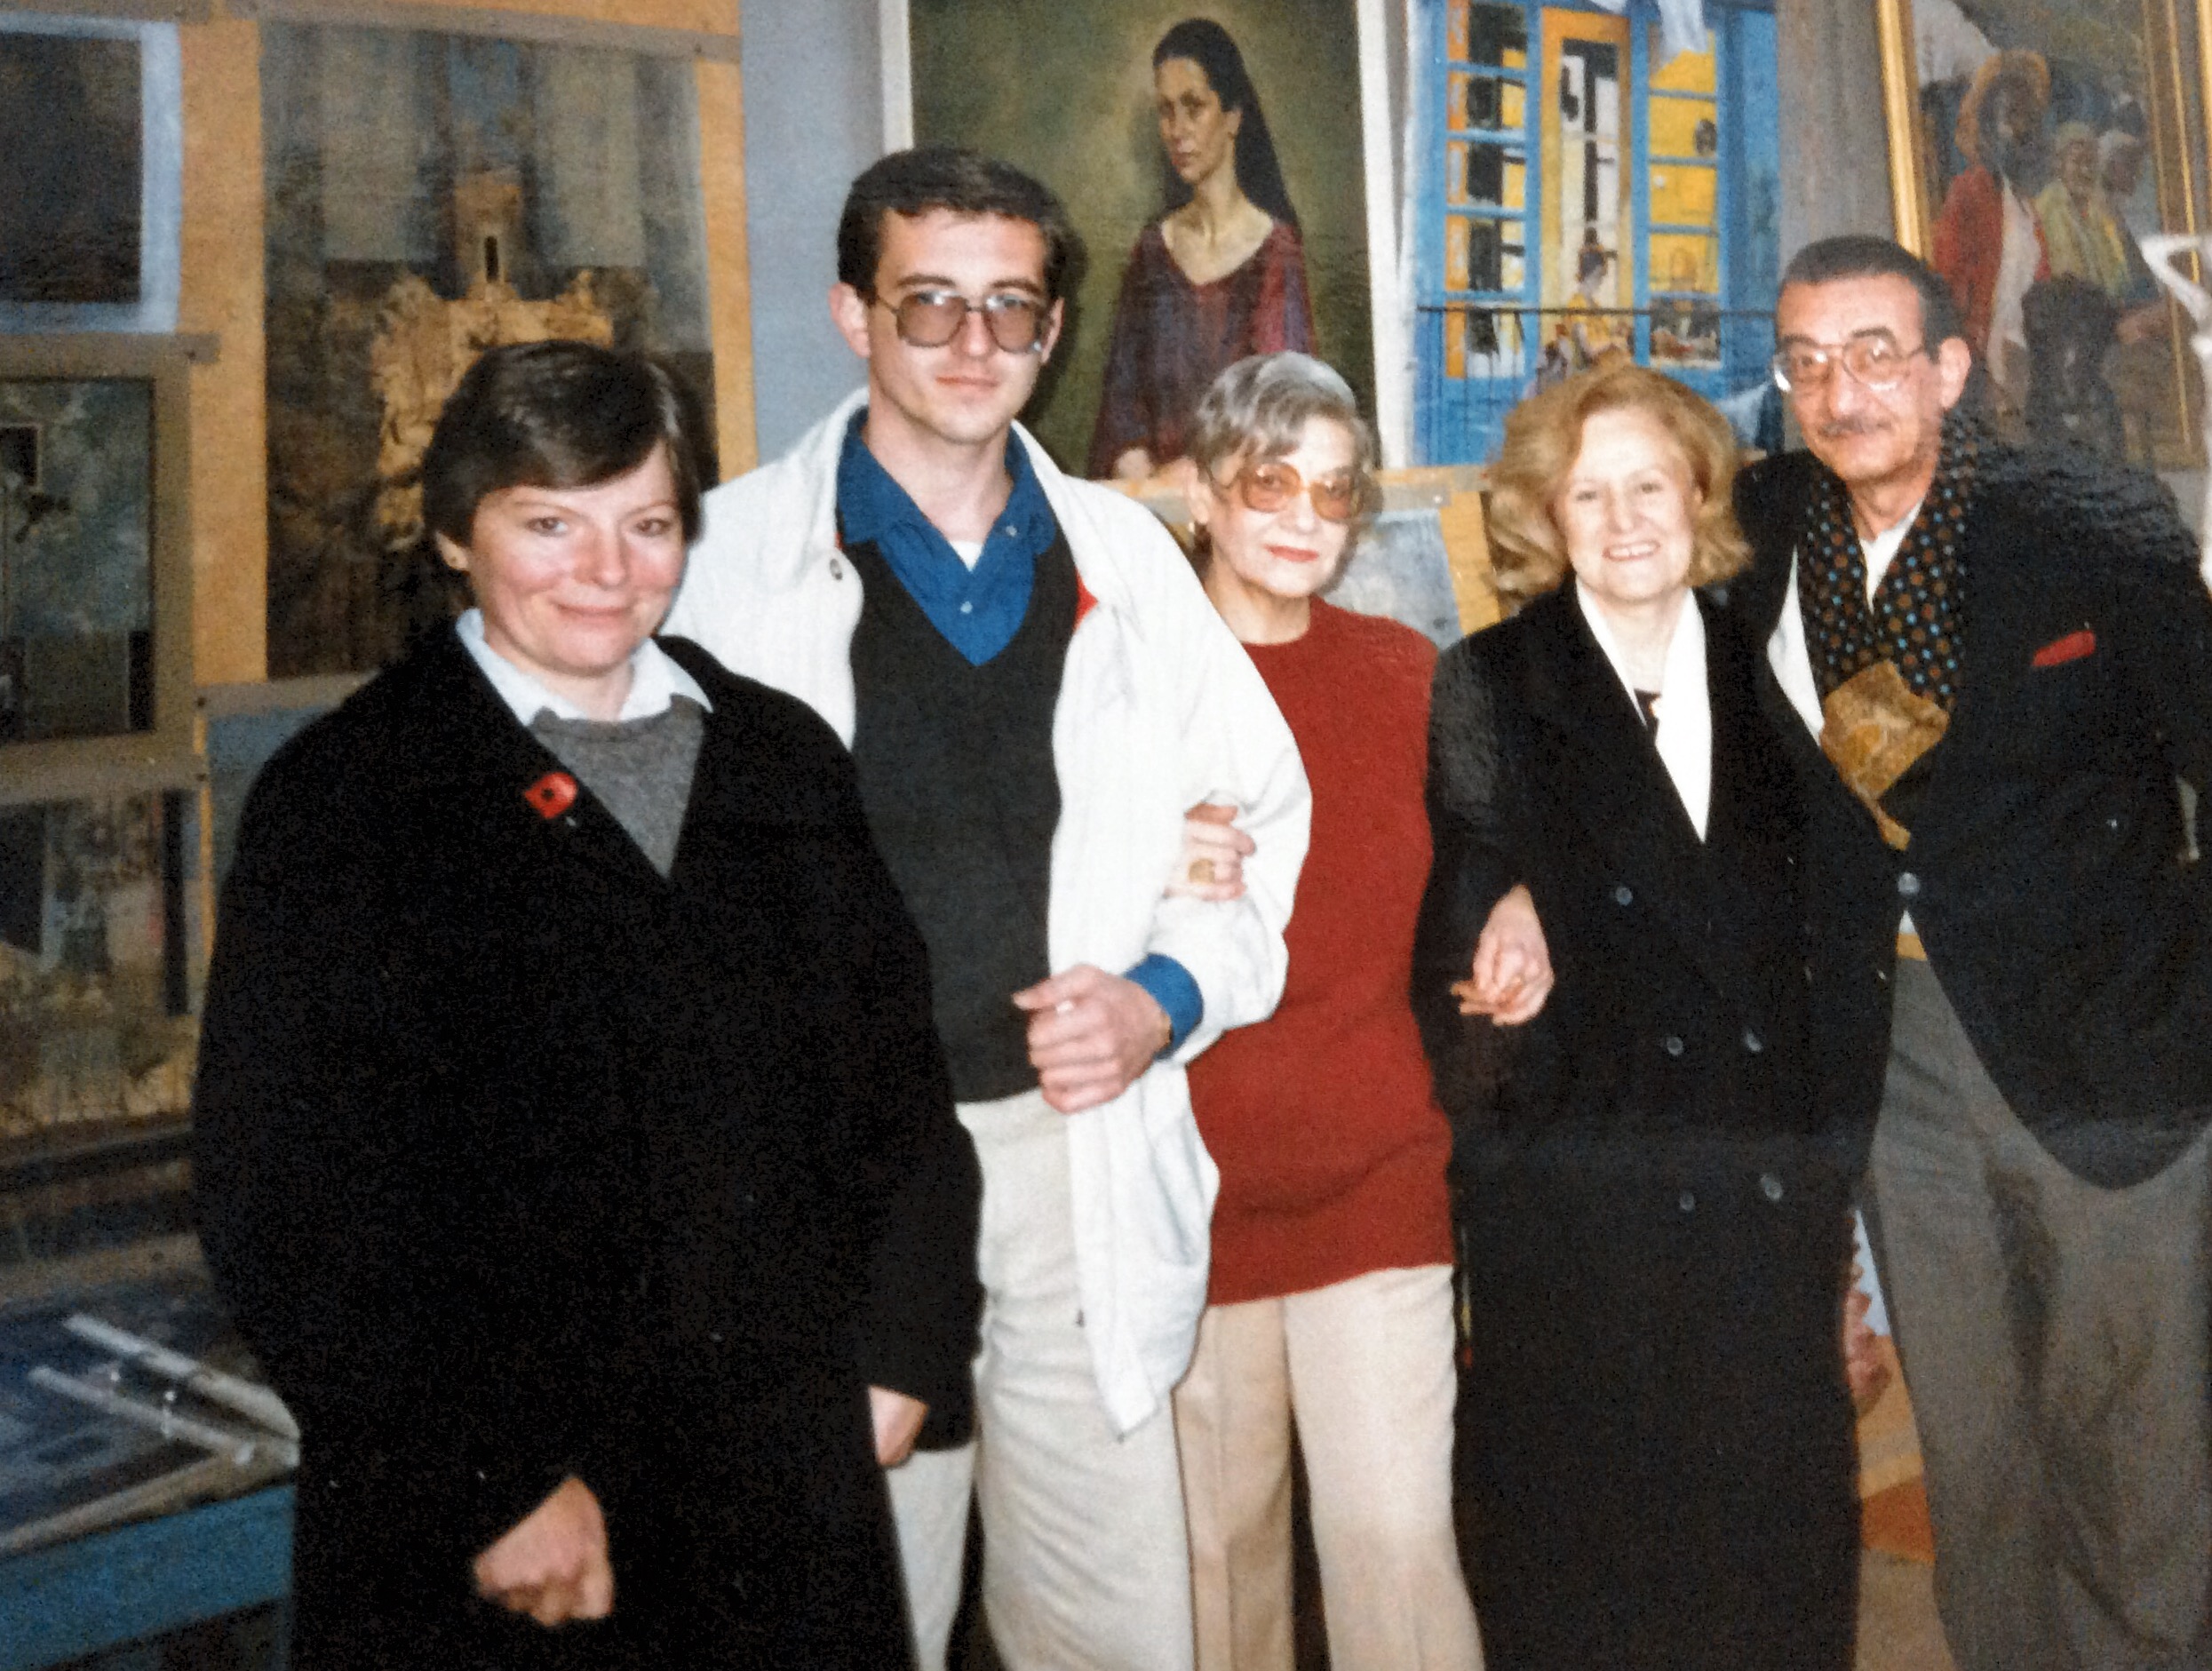 We visited the Atelier of Alexander Berdysheff in Tbilisi with Elizabeth Smith and Alexander’s parents. In 1997.